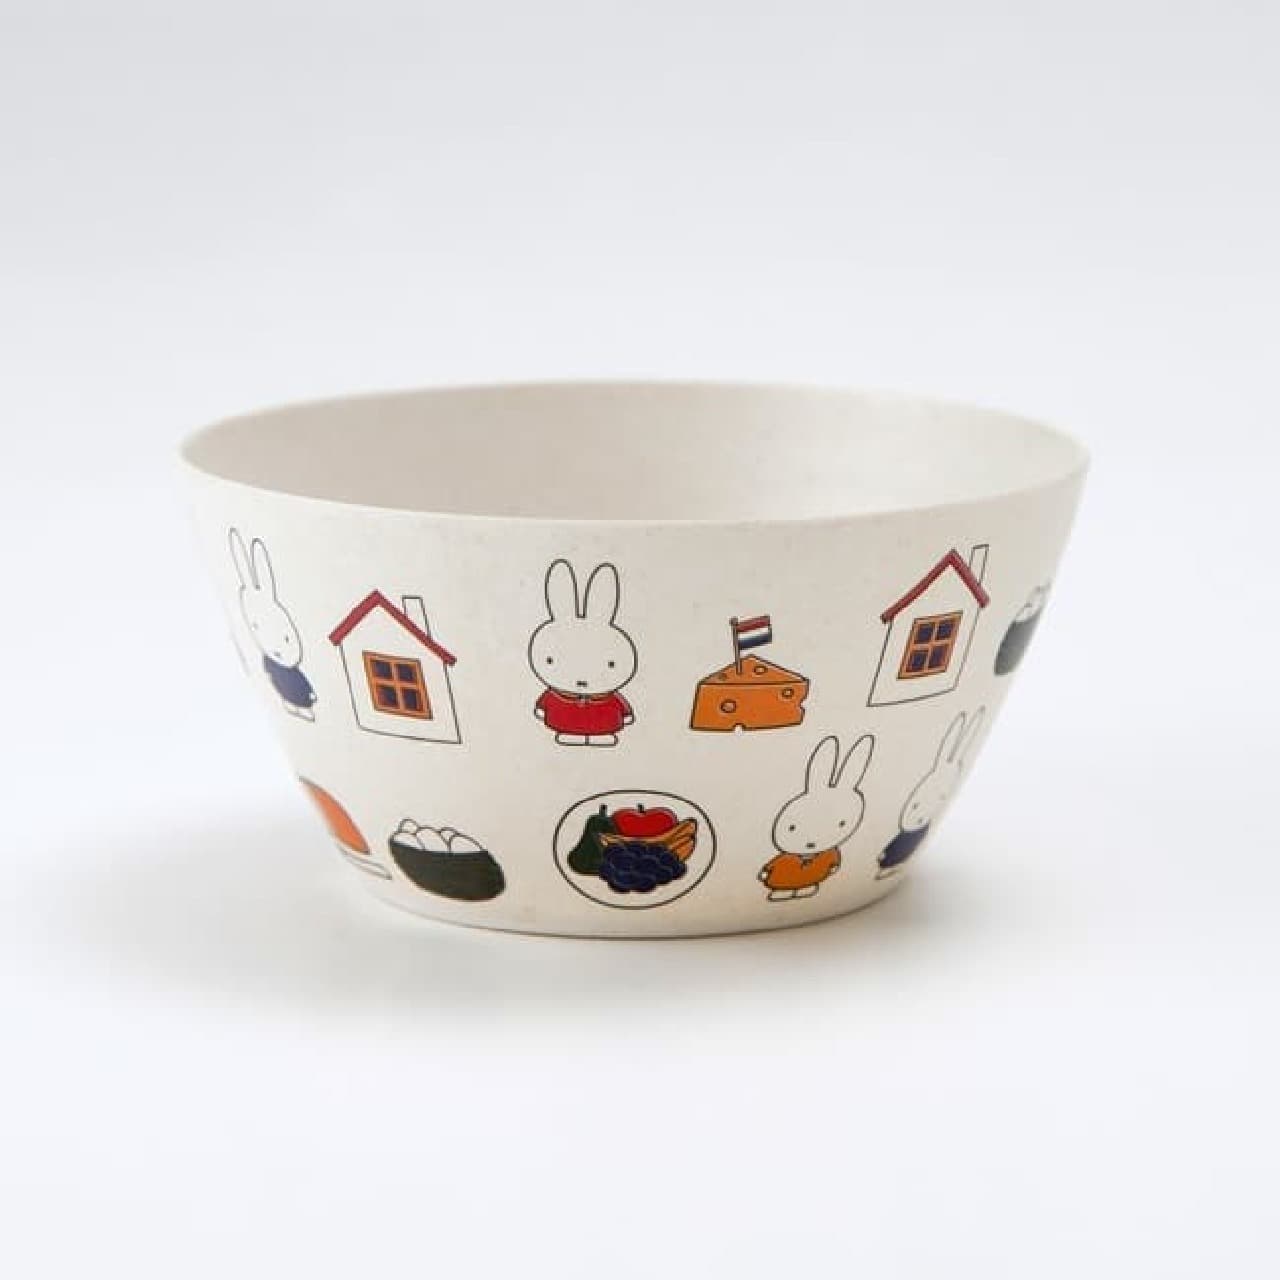 Collaboration between Miffy and salut!